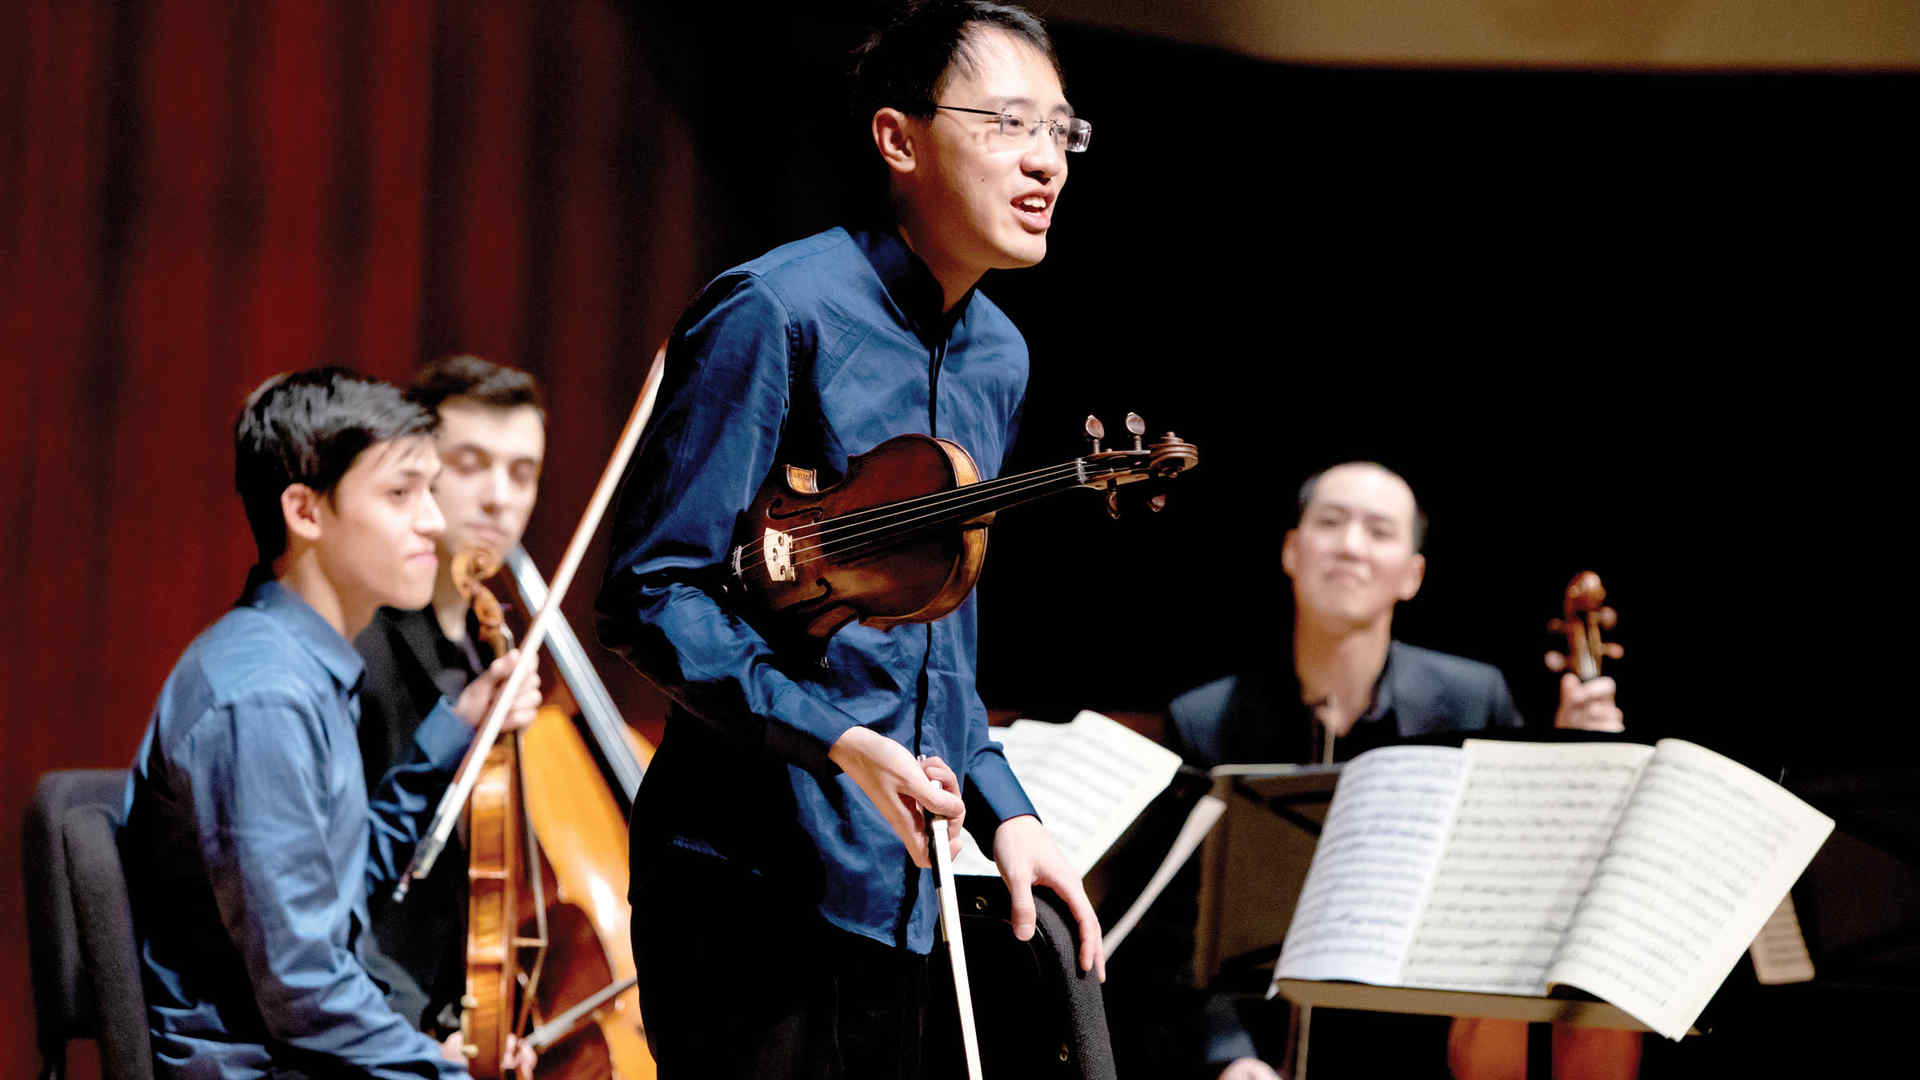 Violinist Max Tan with three colleagues from his chamber music group on stage during ChamberFest